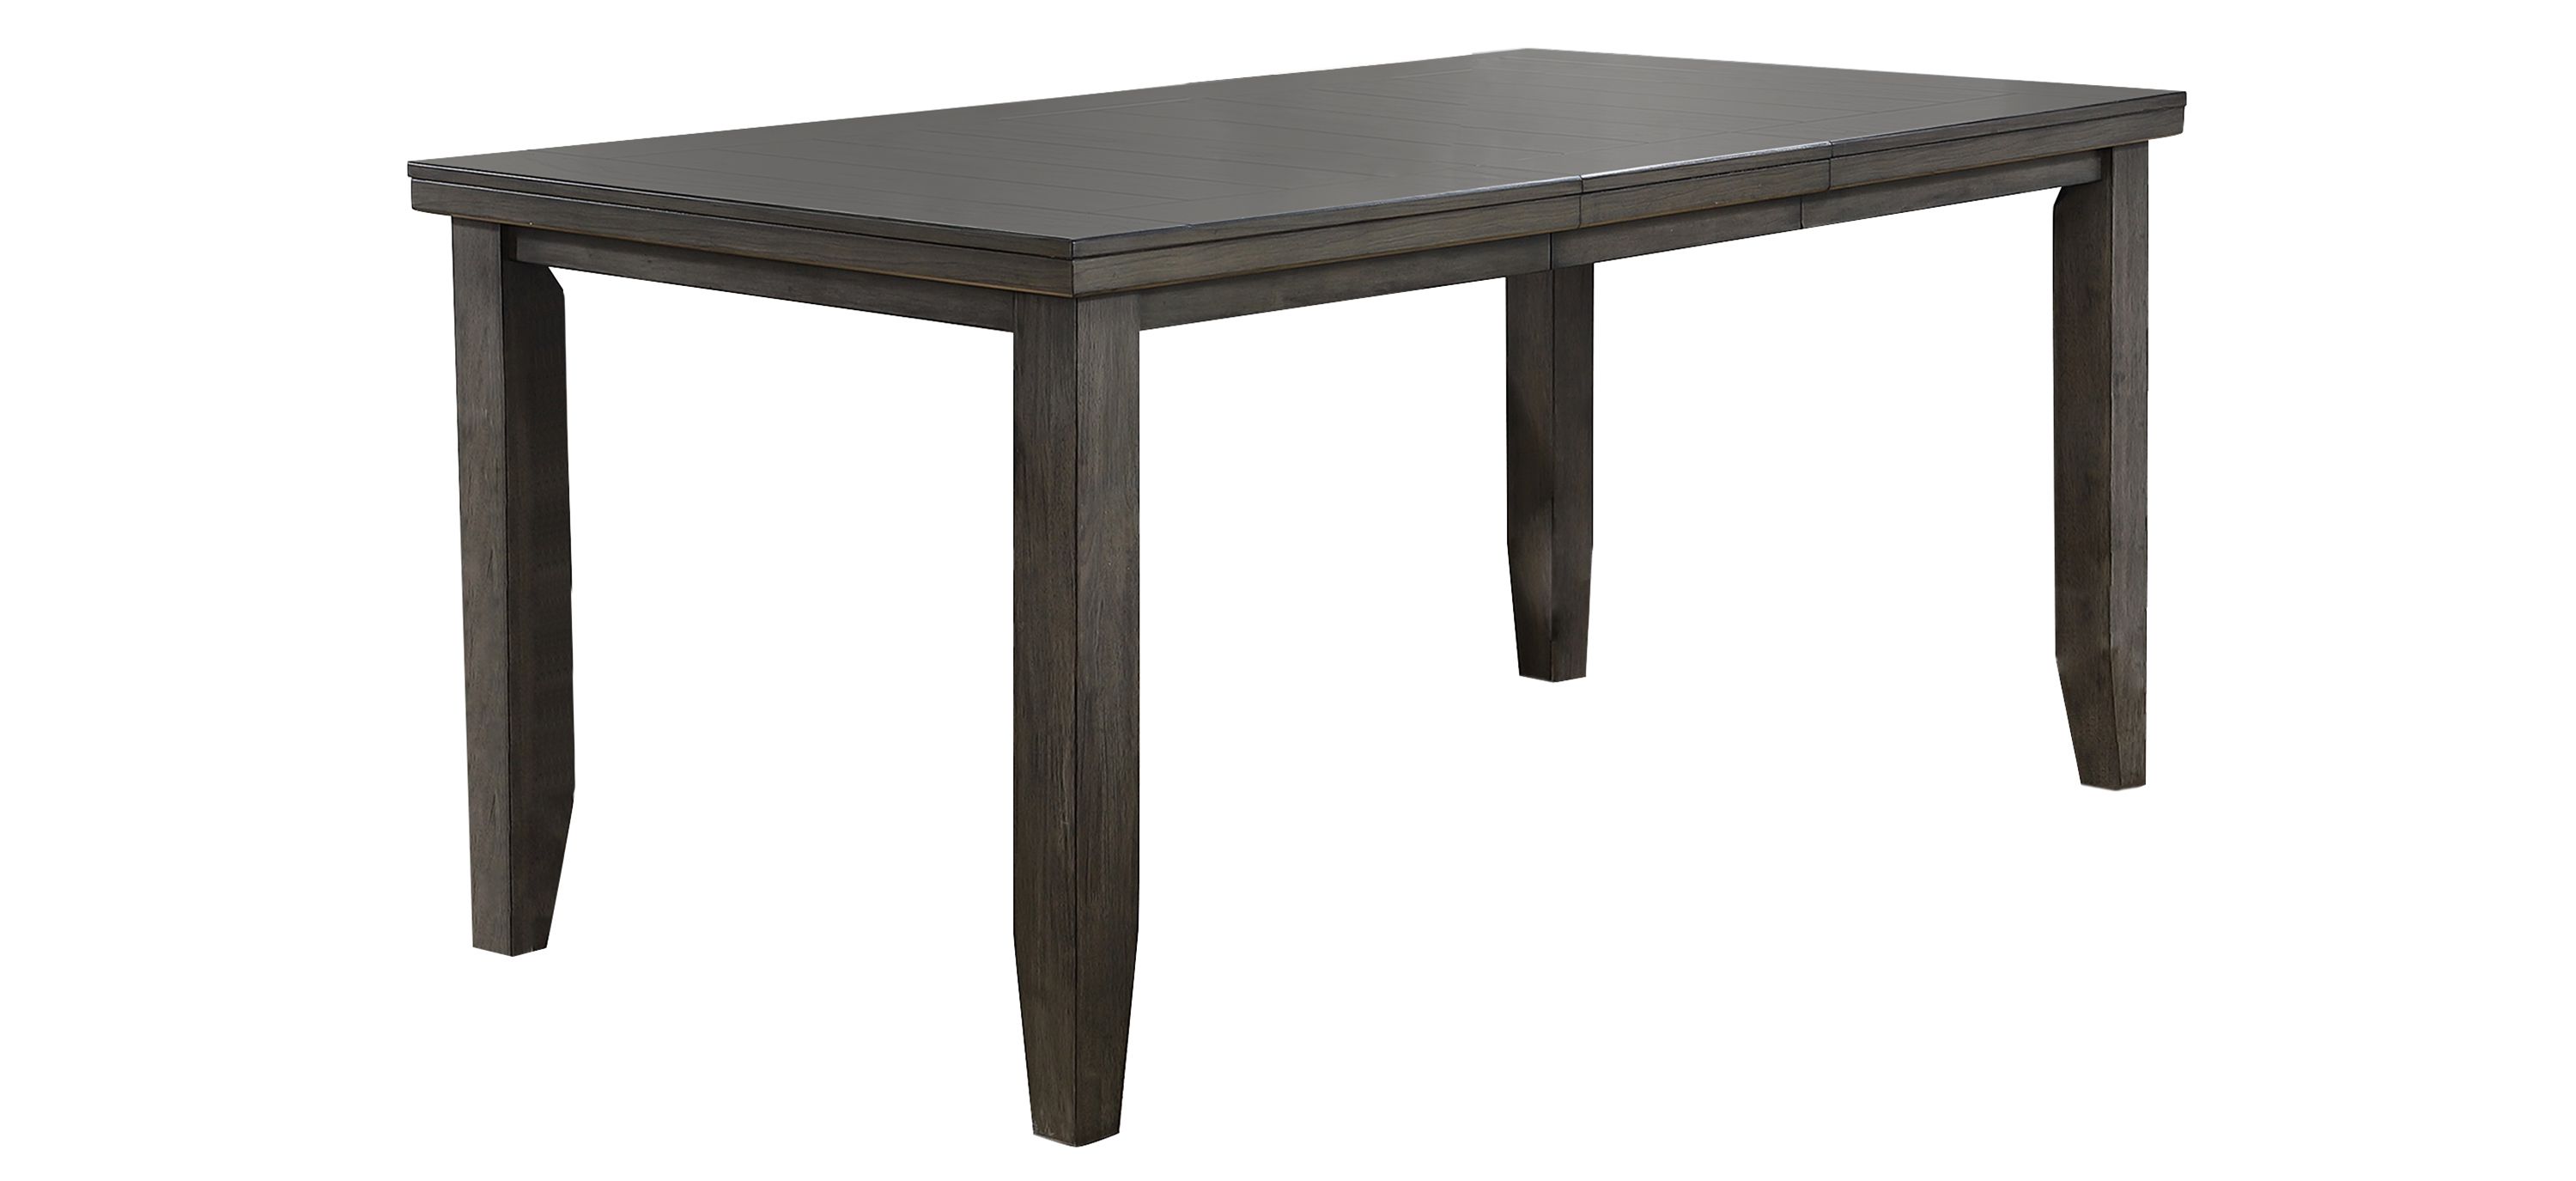 Bardstown Counter-Height Dining Table w/ Leaf